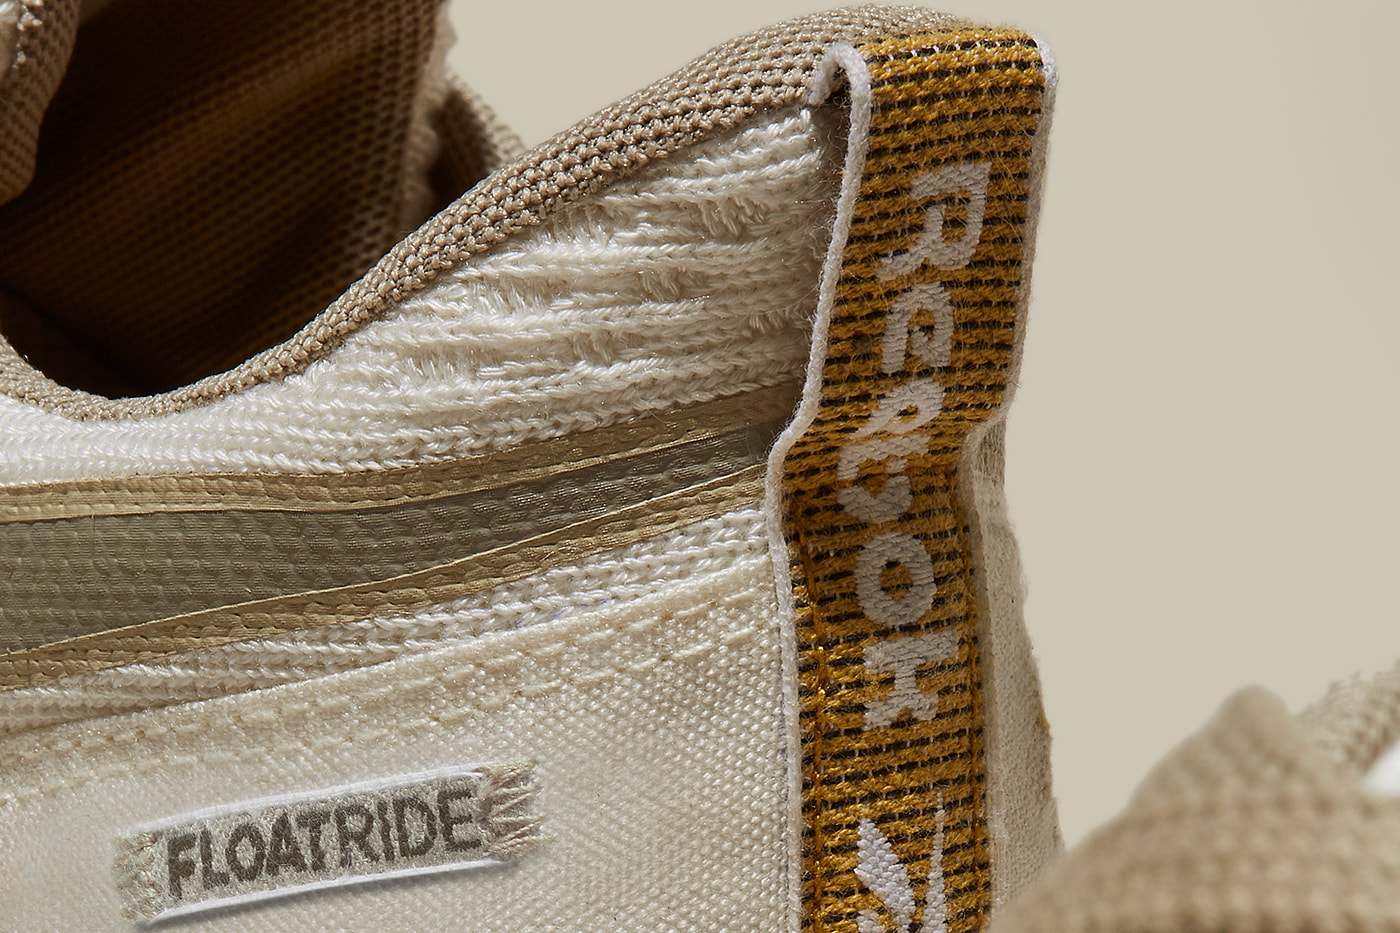 Reebok Forever Floatride Grow Unveil Release First Look Info Beige off white gum rubber sustainability environment [REE]GROW [REE]CYCLED Sekisui Corporation